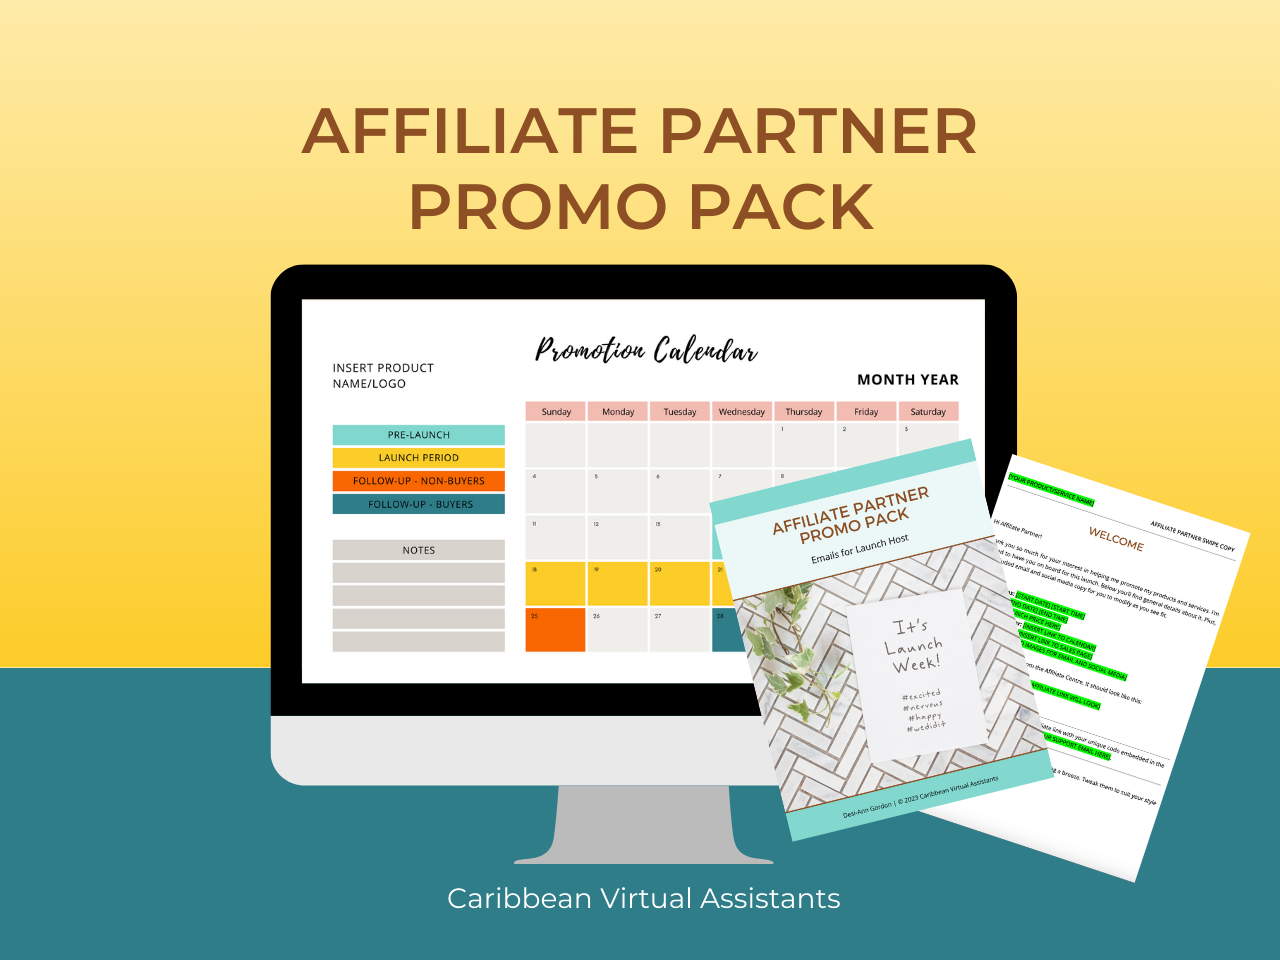 images of files in the affiliate partner promo pack